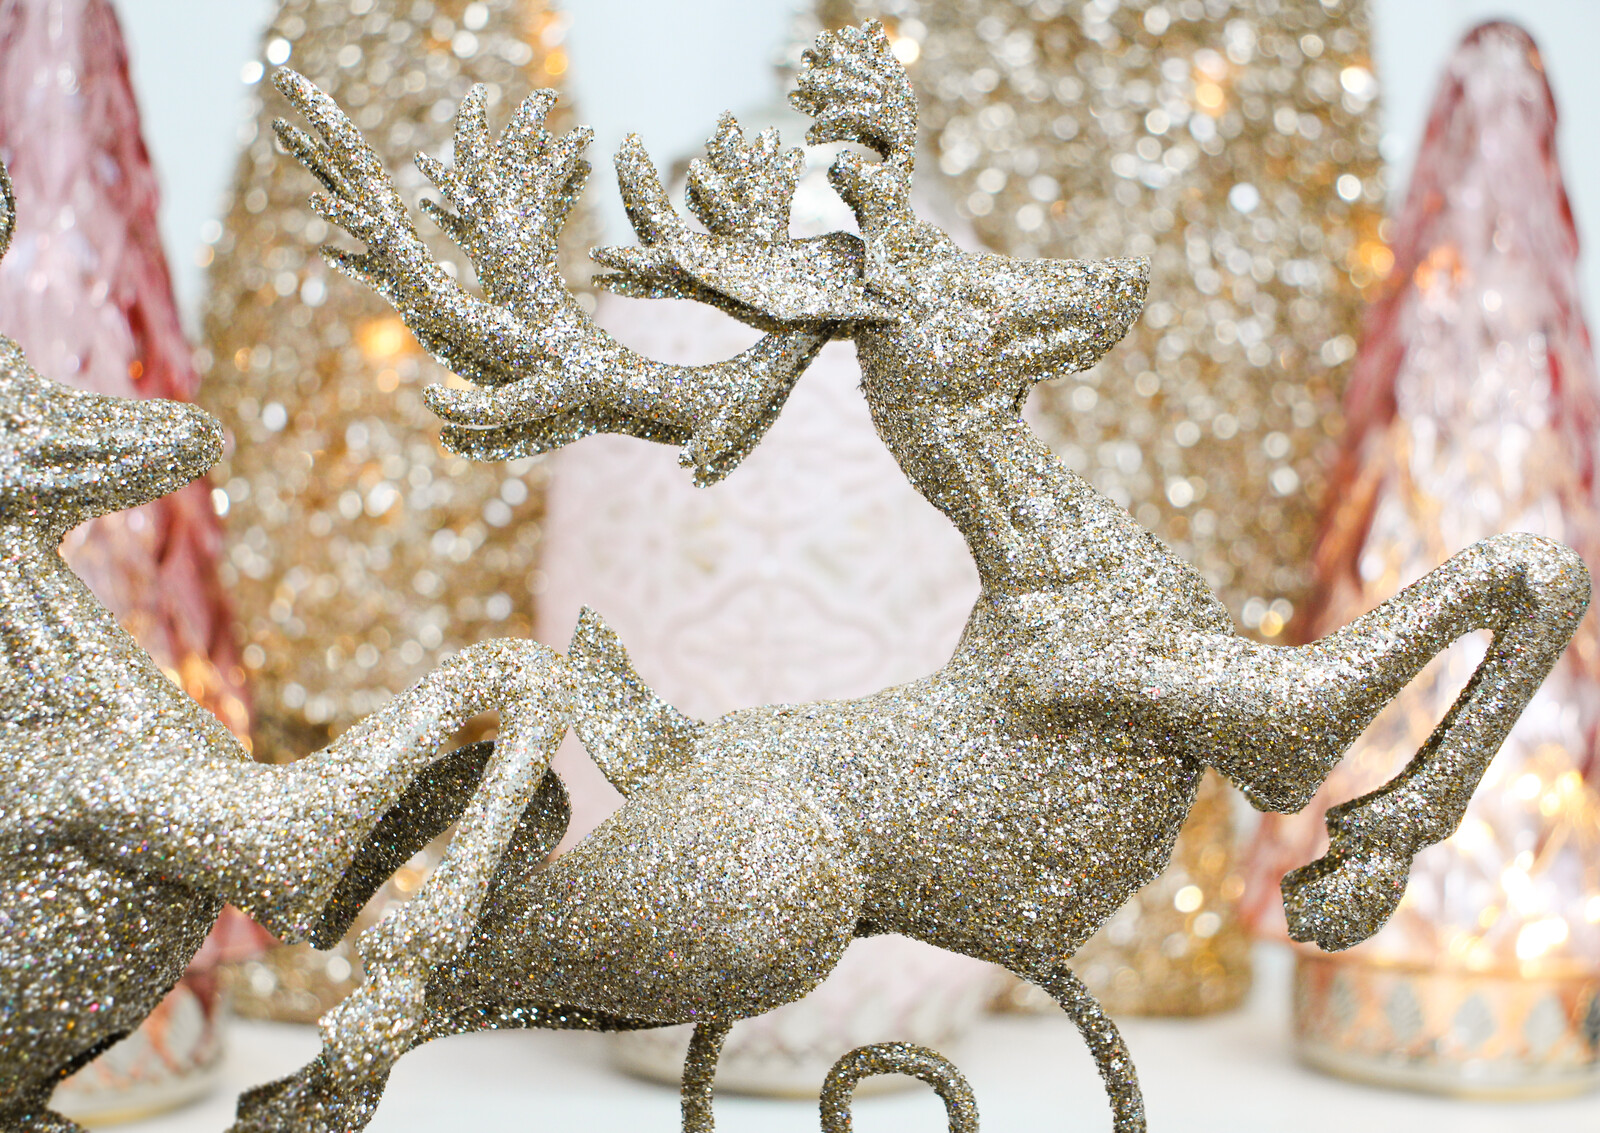 Large Gold Reindeers and Sleigh